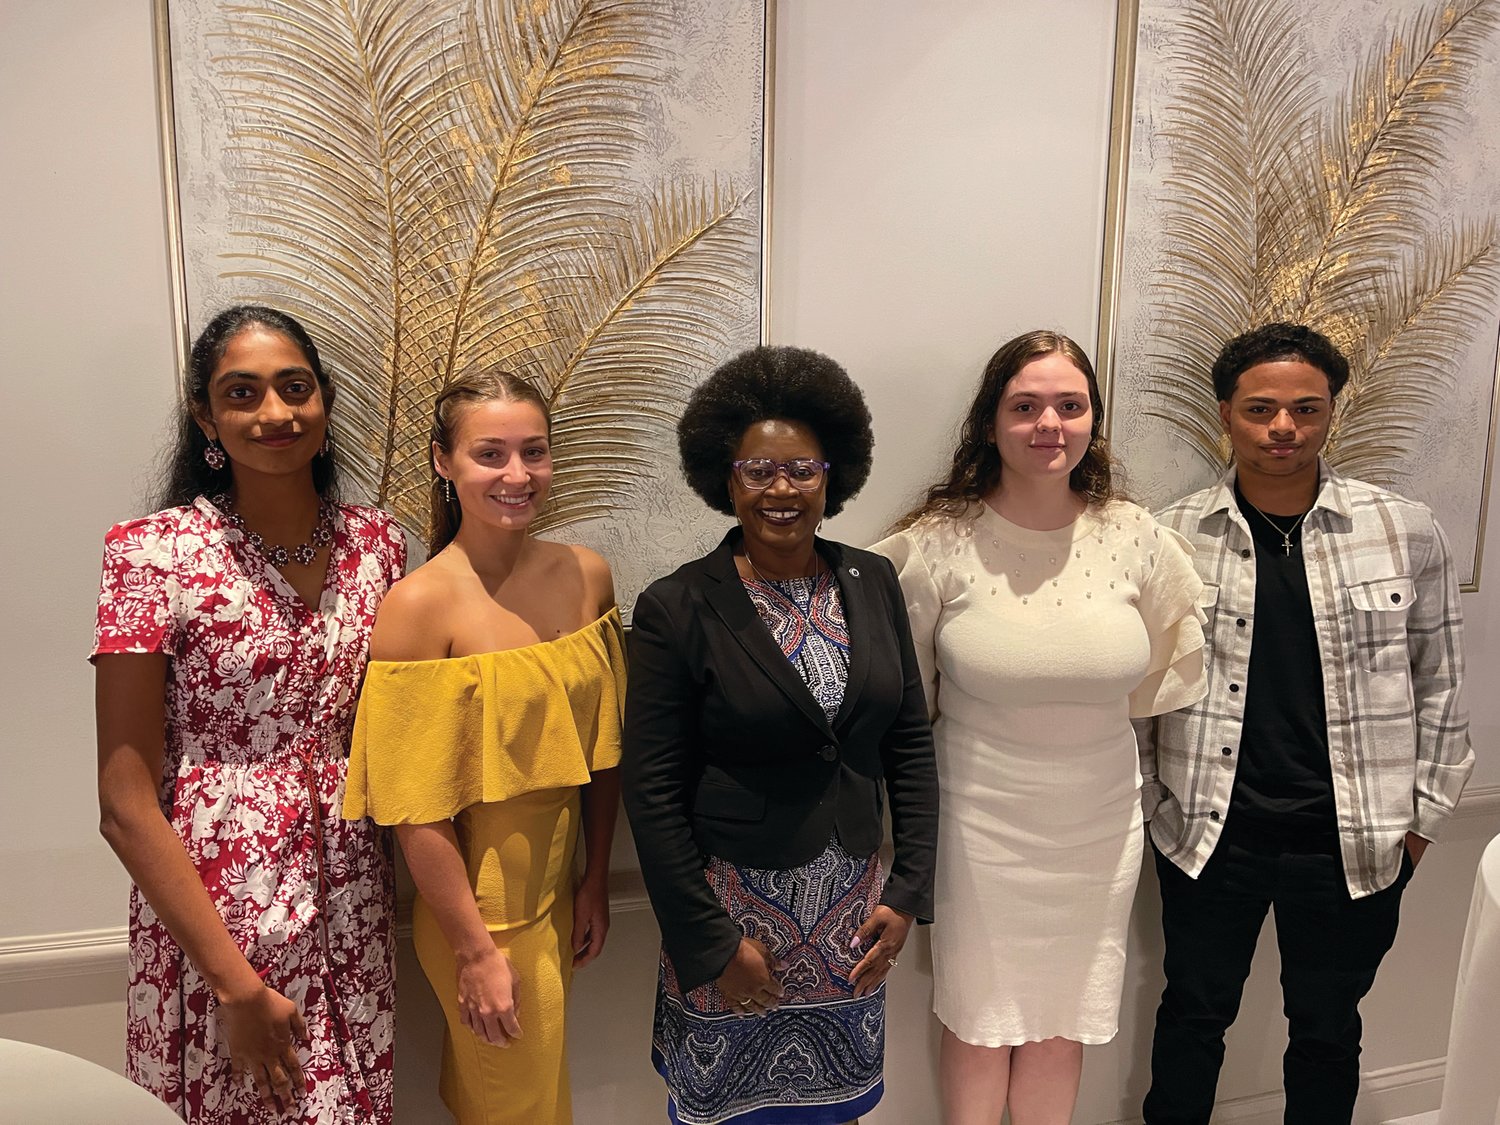 CONGRATULATIONS: Ward 2 City Councilwoman Aniece Germain, center, congratulates the four Hall of Fame scholarship recipients during an intermission at last week’s dinner. The scholars are, from left, Sanjana Ananthula, Mikaya Parente, Maria Silva and Xavier Pichardo.